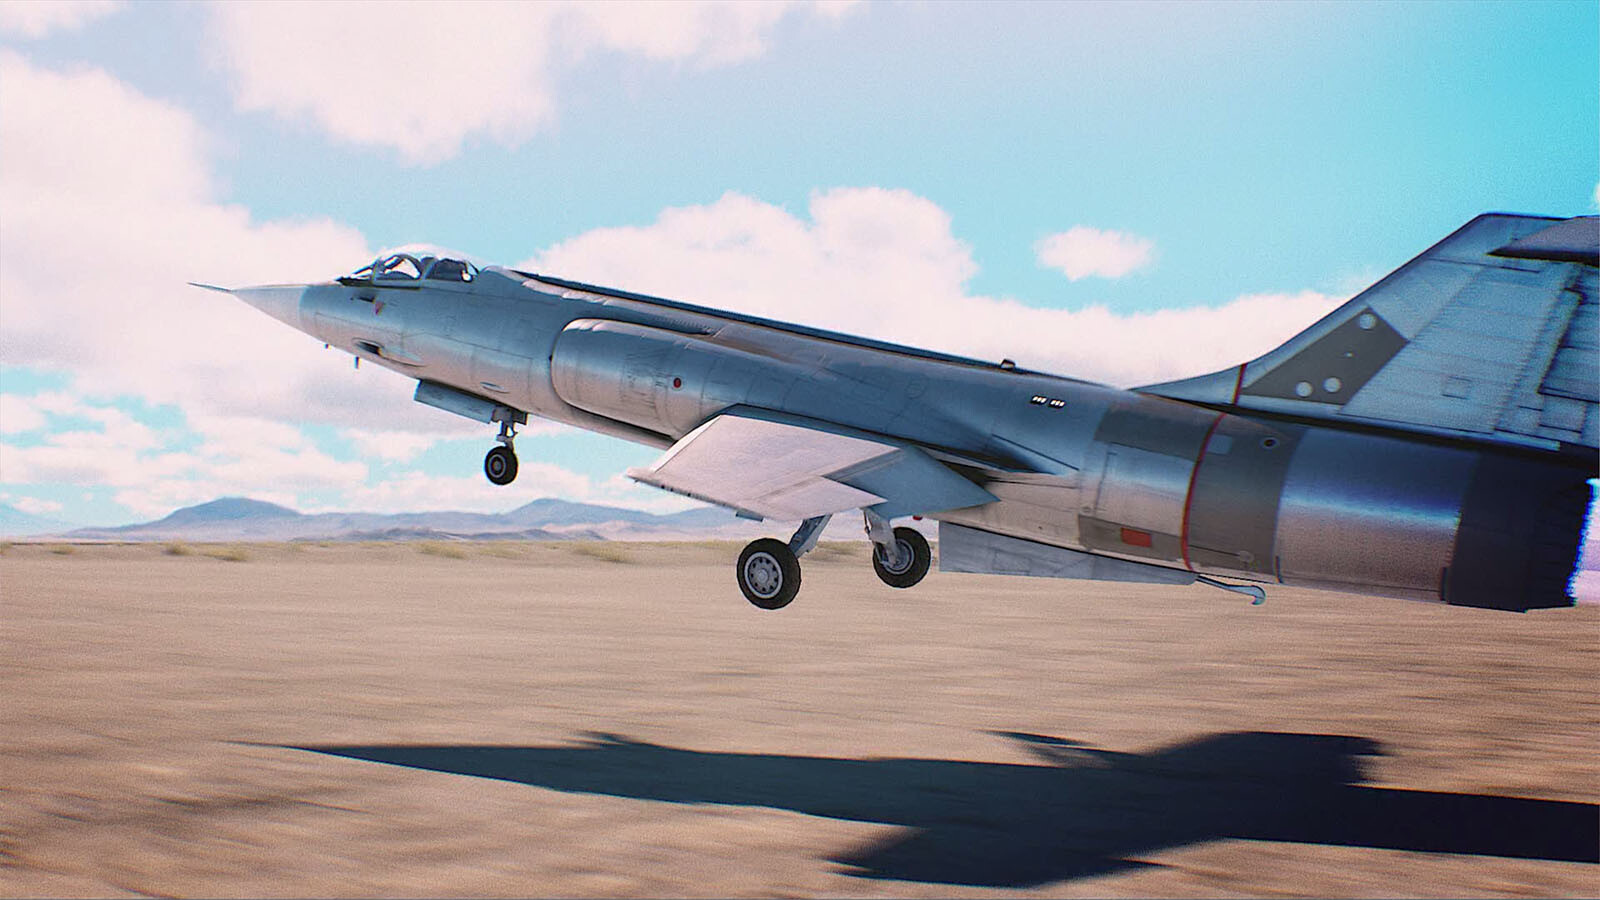 Ace Combat 7: Skies Unknown gets new Unexpected Visitor mission